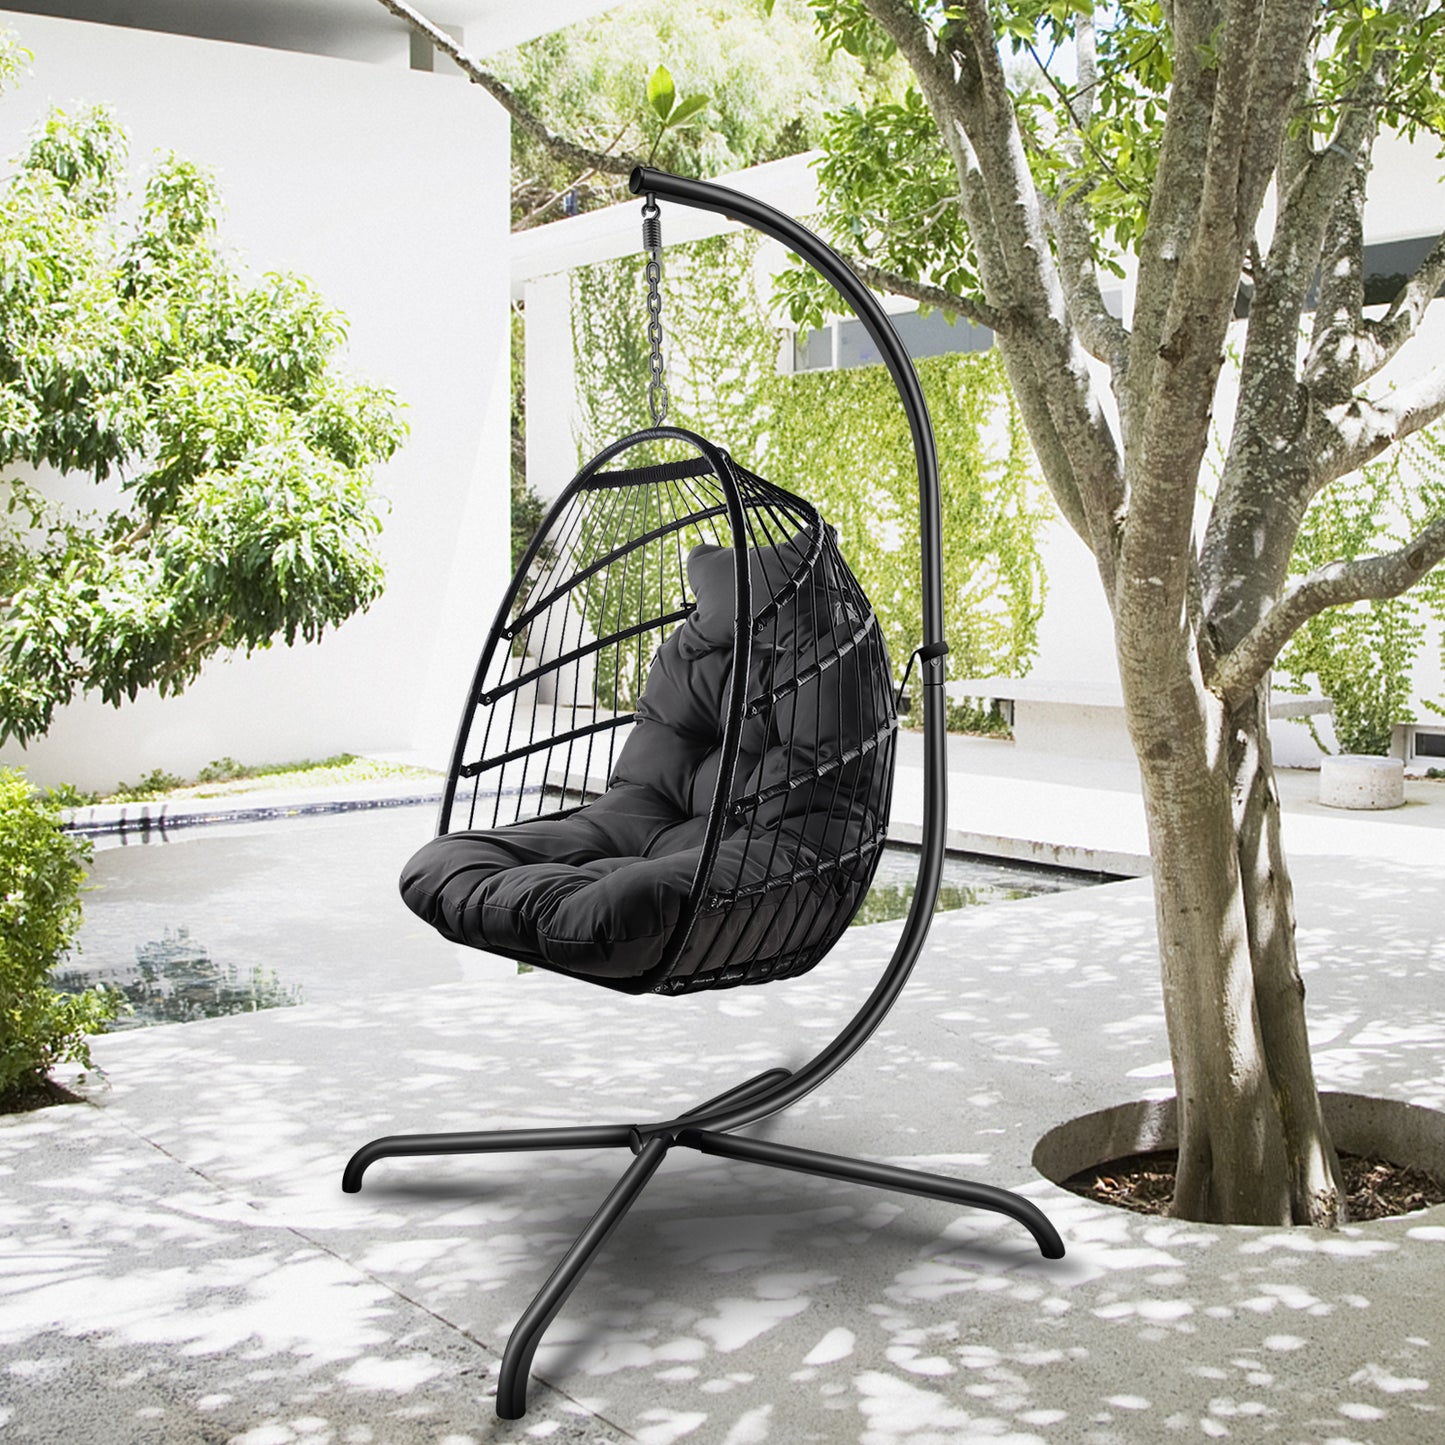 SYNGAR Egg Chair with Stand, Wicker Swing Chair, Patio Hammock Chair with Soft Cushion, Indoor Outdoor Balcony Bedroom Basket Hanging Lounge Chair, Heavy Duty Frame for 350 lbs Capacity, C27